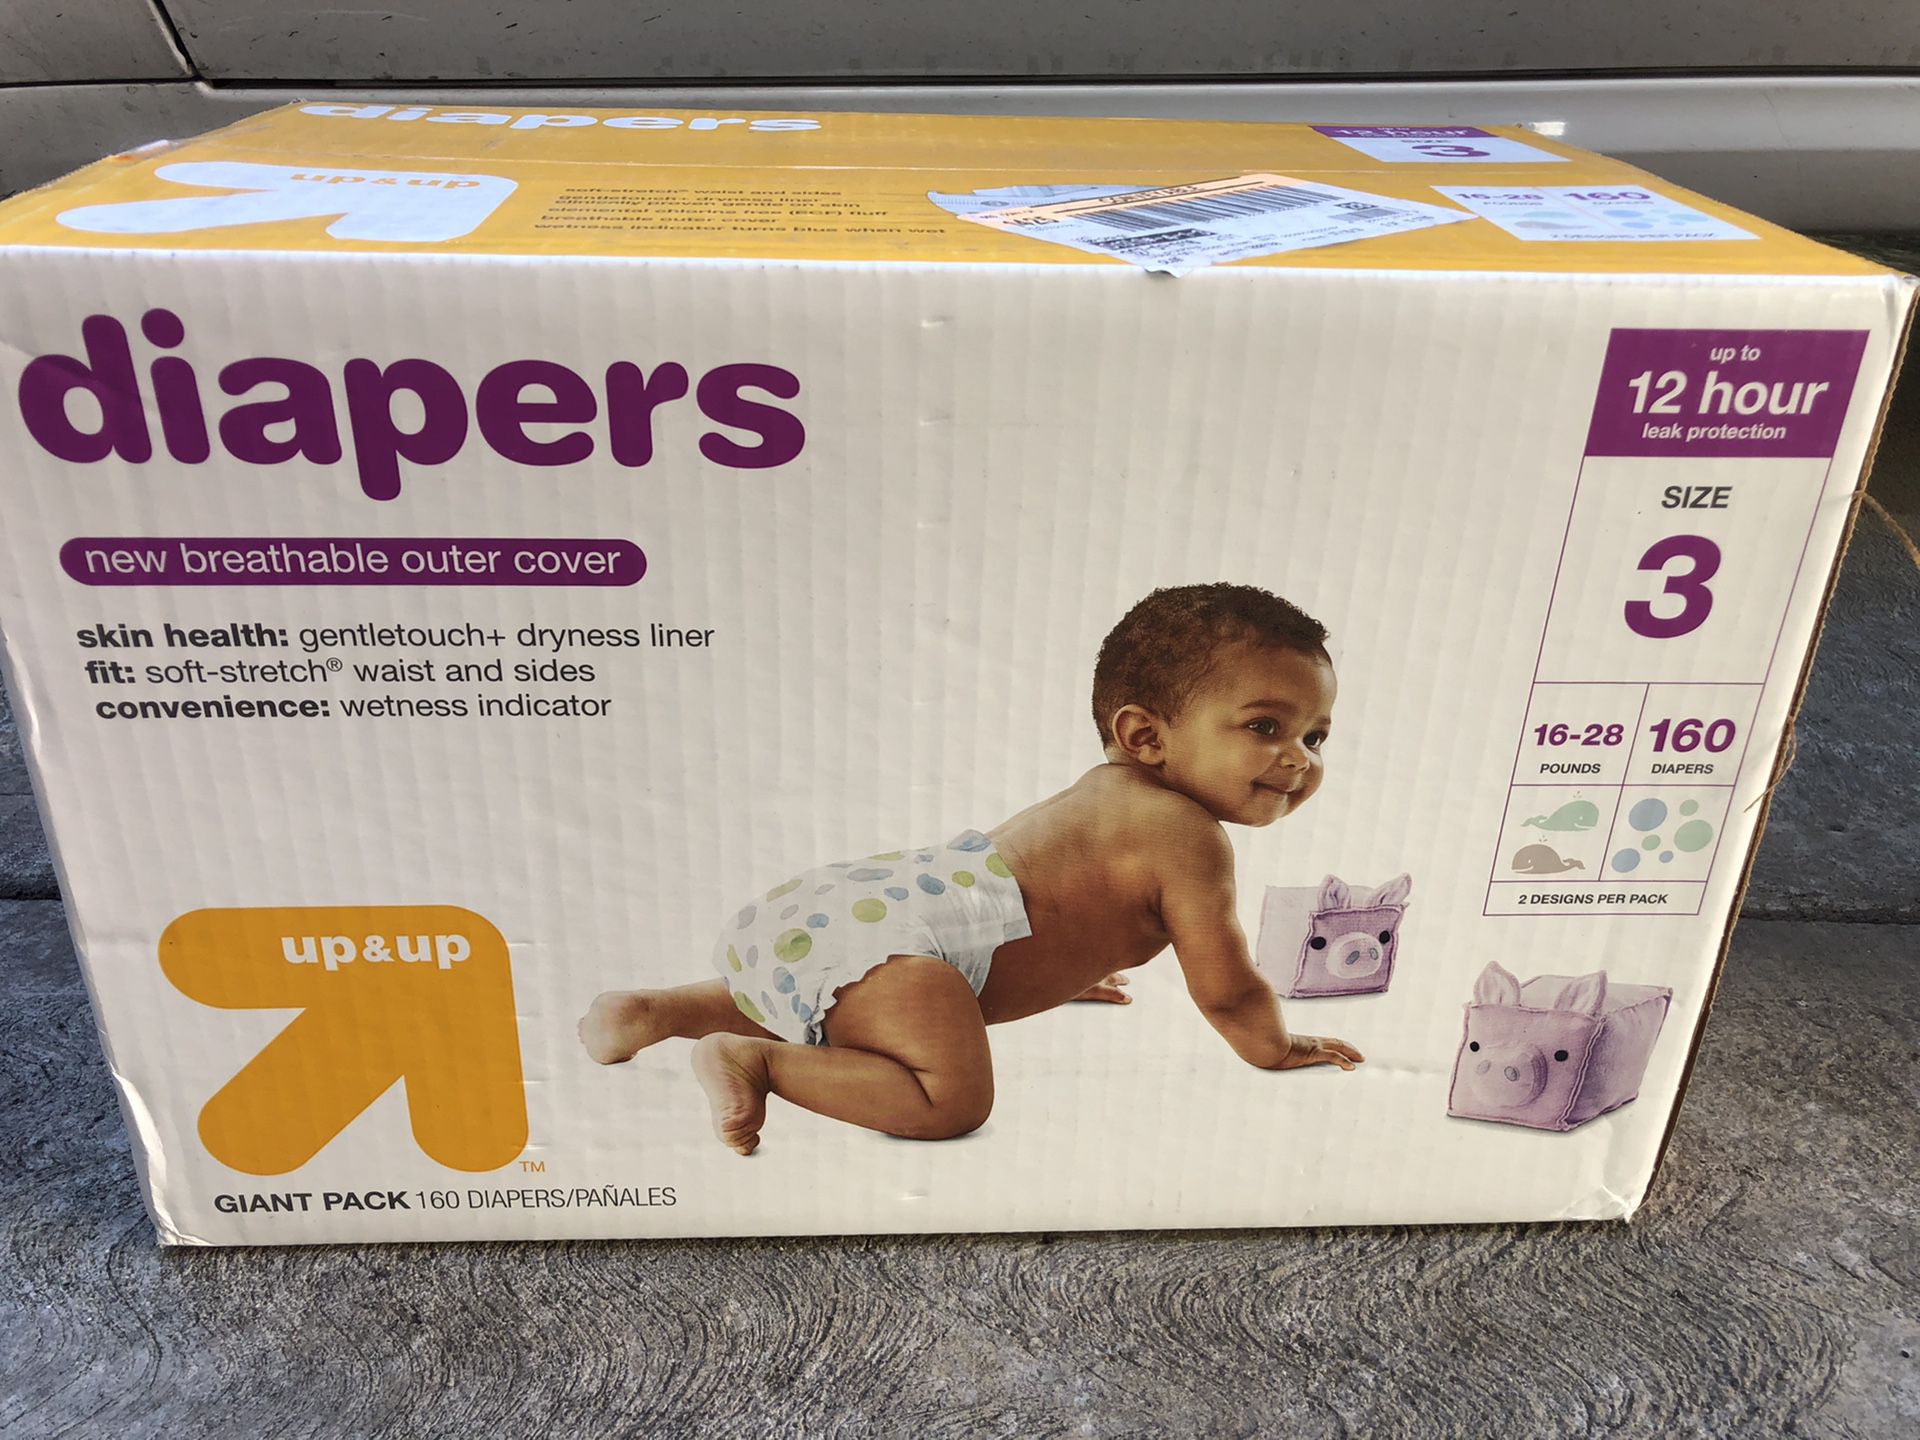 Up and Up diapers size 3